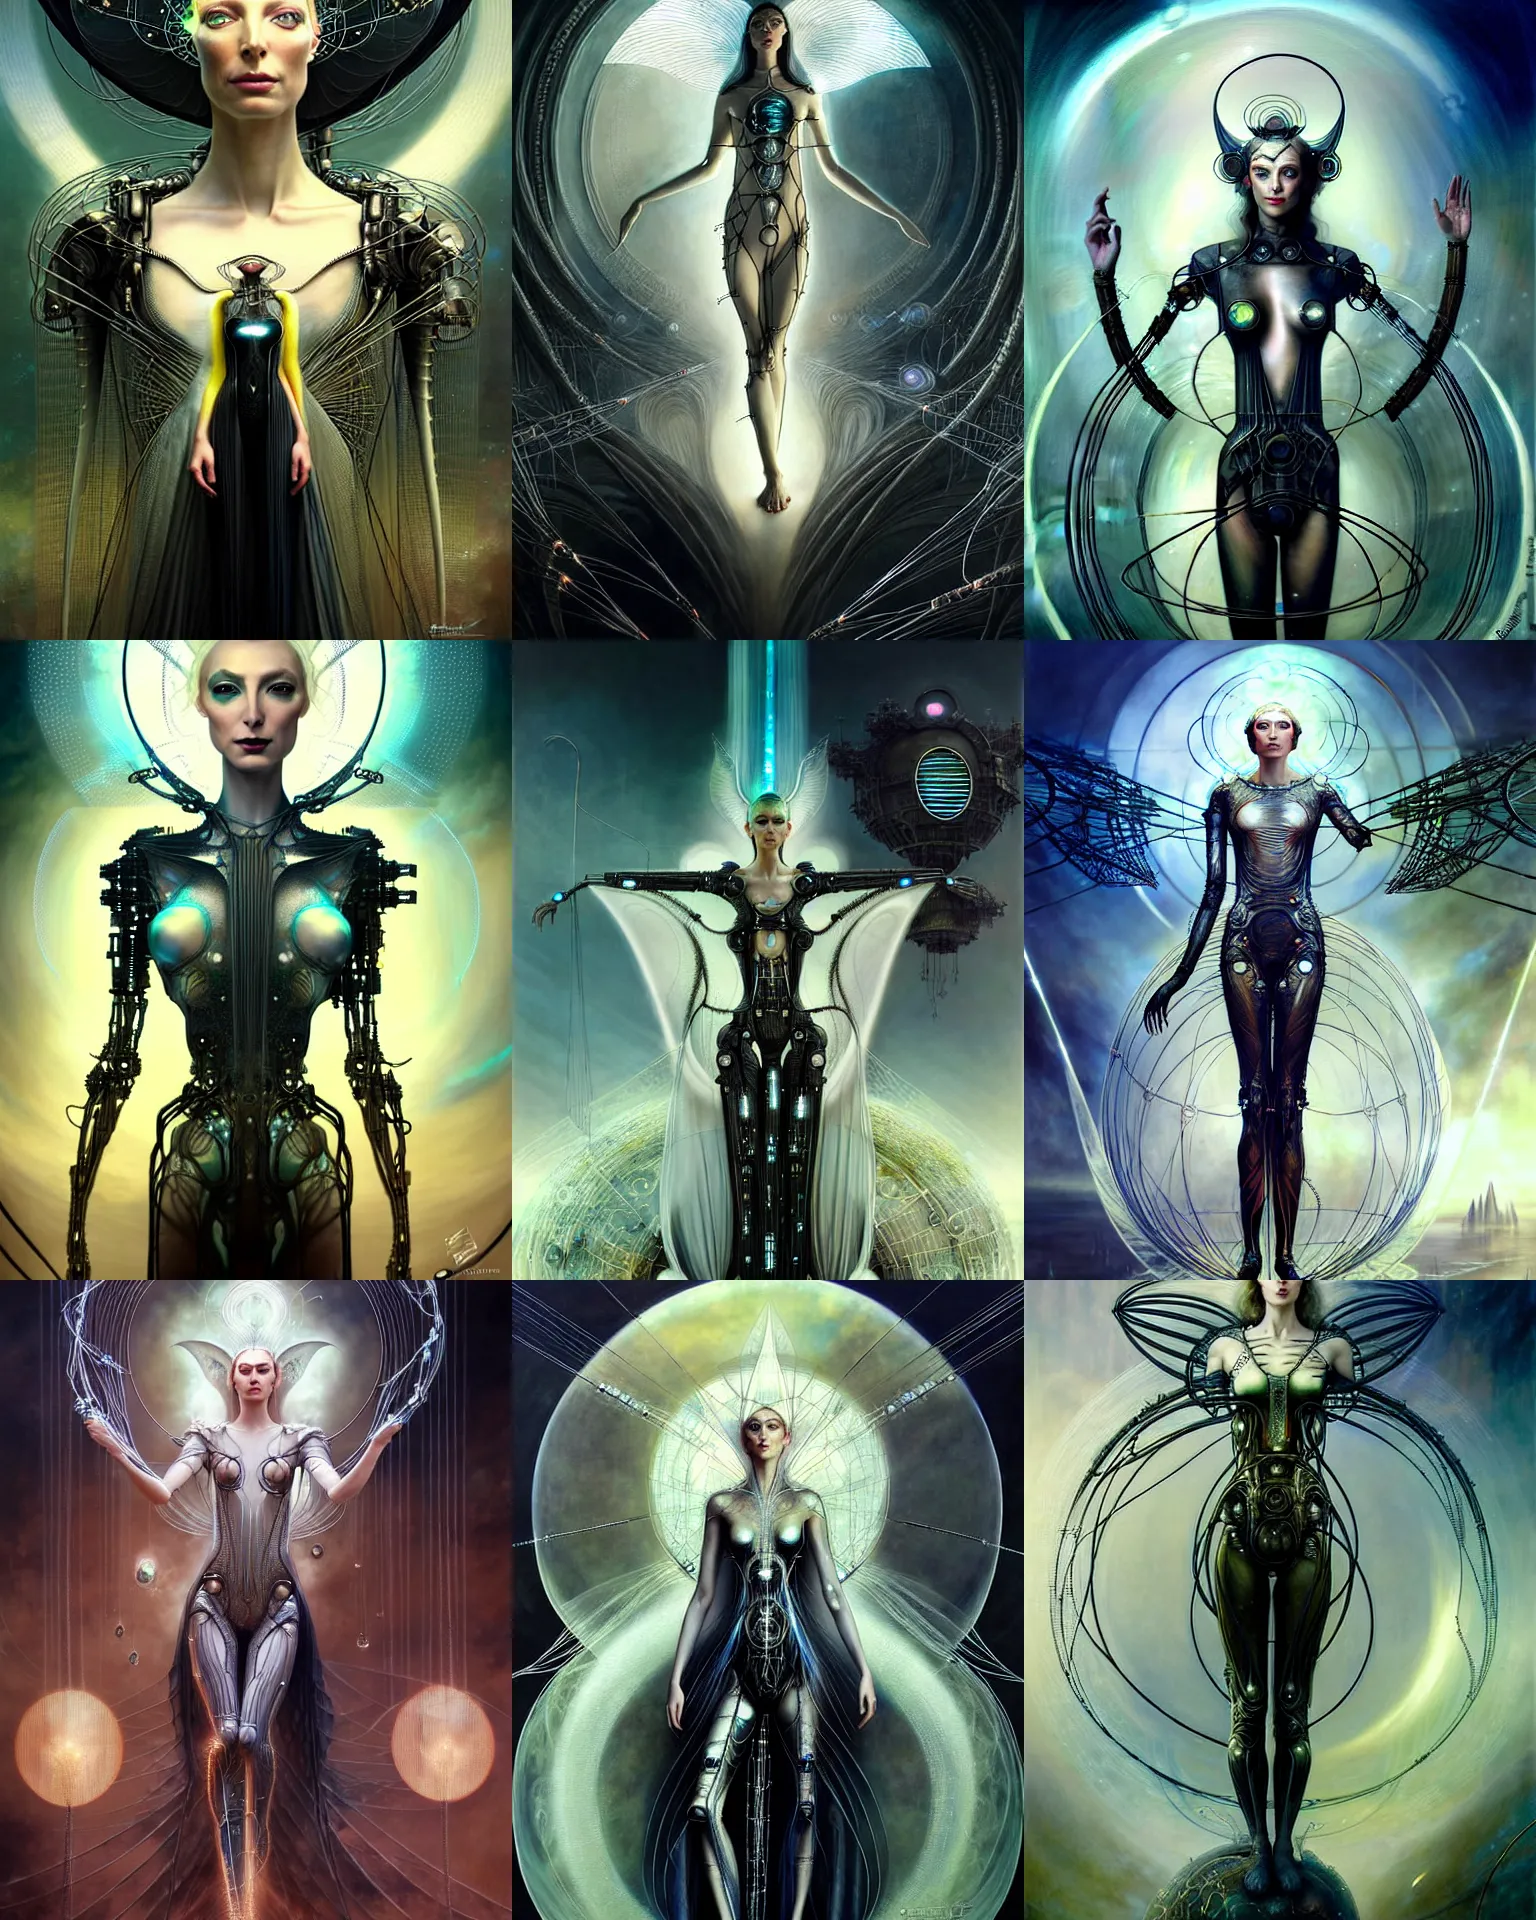 Prompt: karol bak and tom bagshaw and bastien lecouffe - deharme full body character portrait of galadriel as the borg queen, digitalcore rebirth, floating in a powerful zen state, supermodel, beautiful and ominous, wearing combination of mecha and bodysuit made of wires and silk, minas tirith in the background, scifi character render